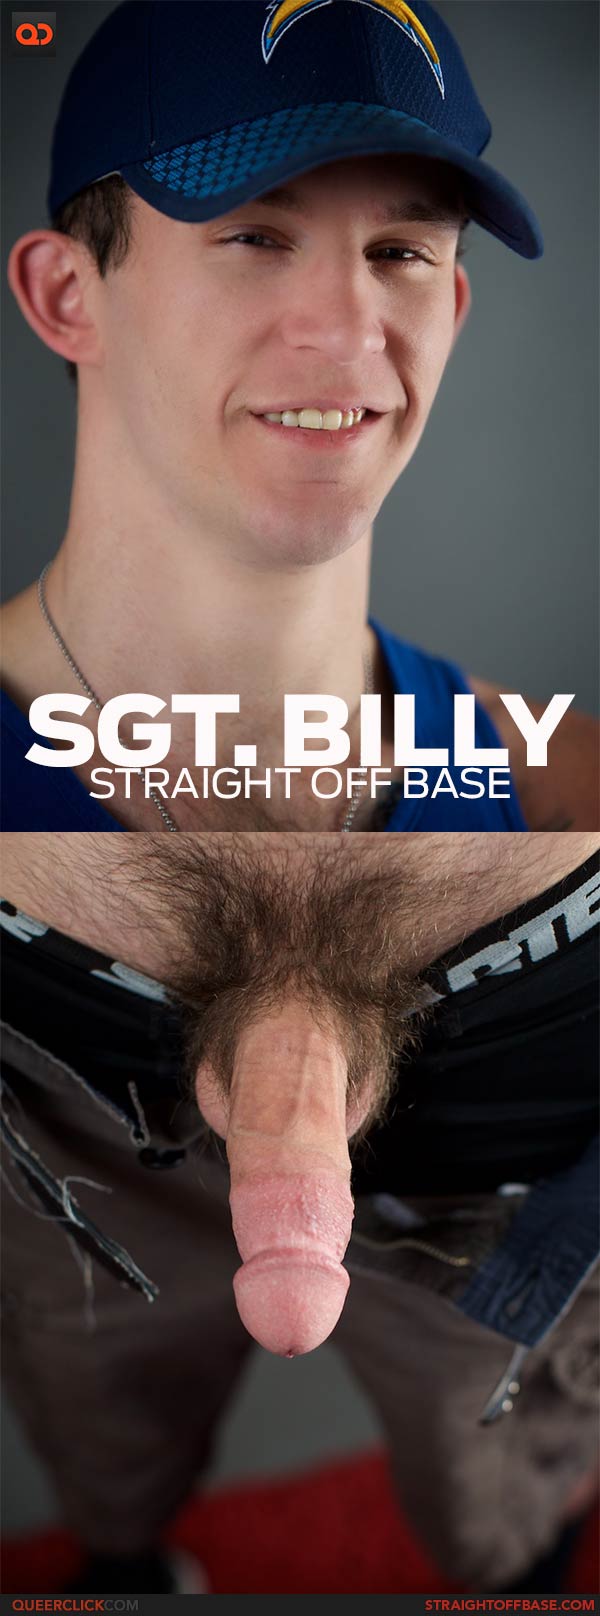 Straight Off Base: Sgt. Billy